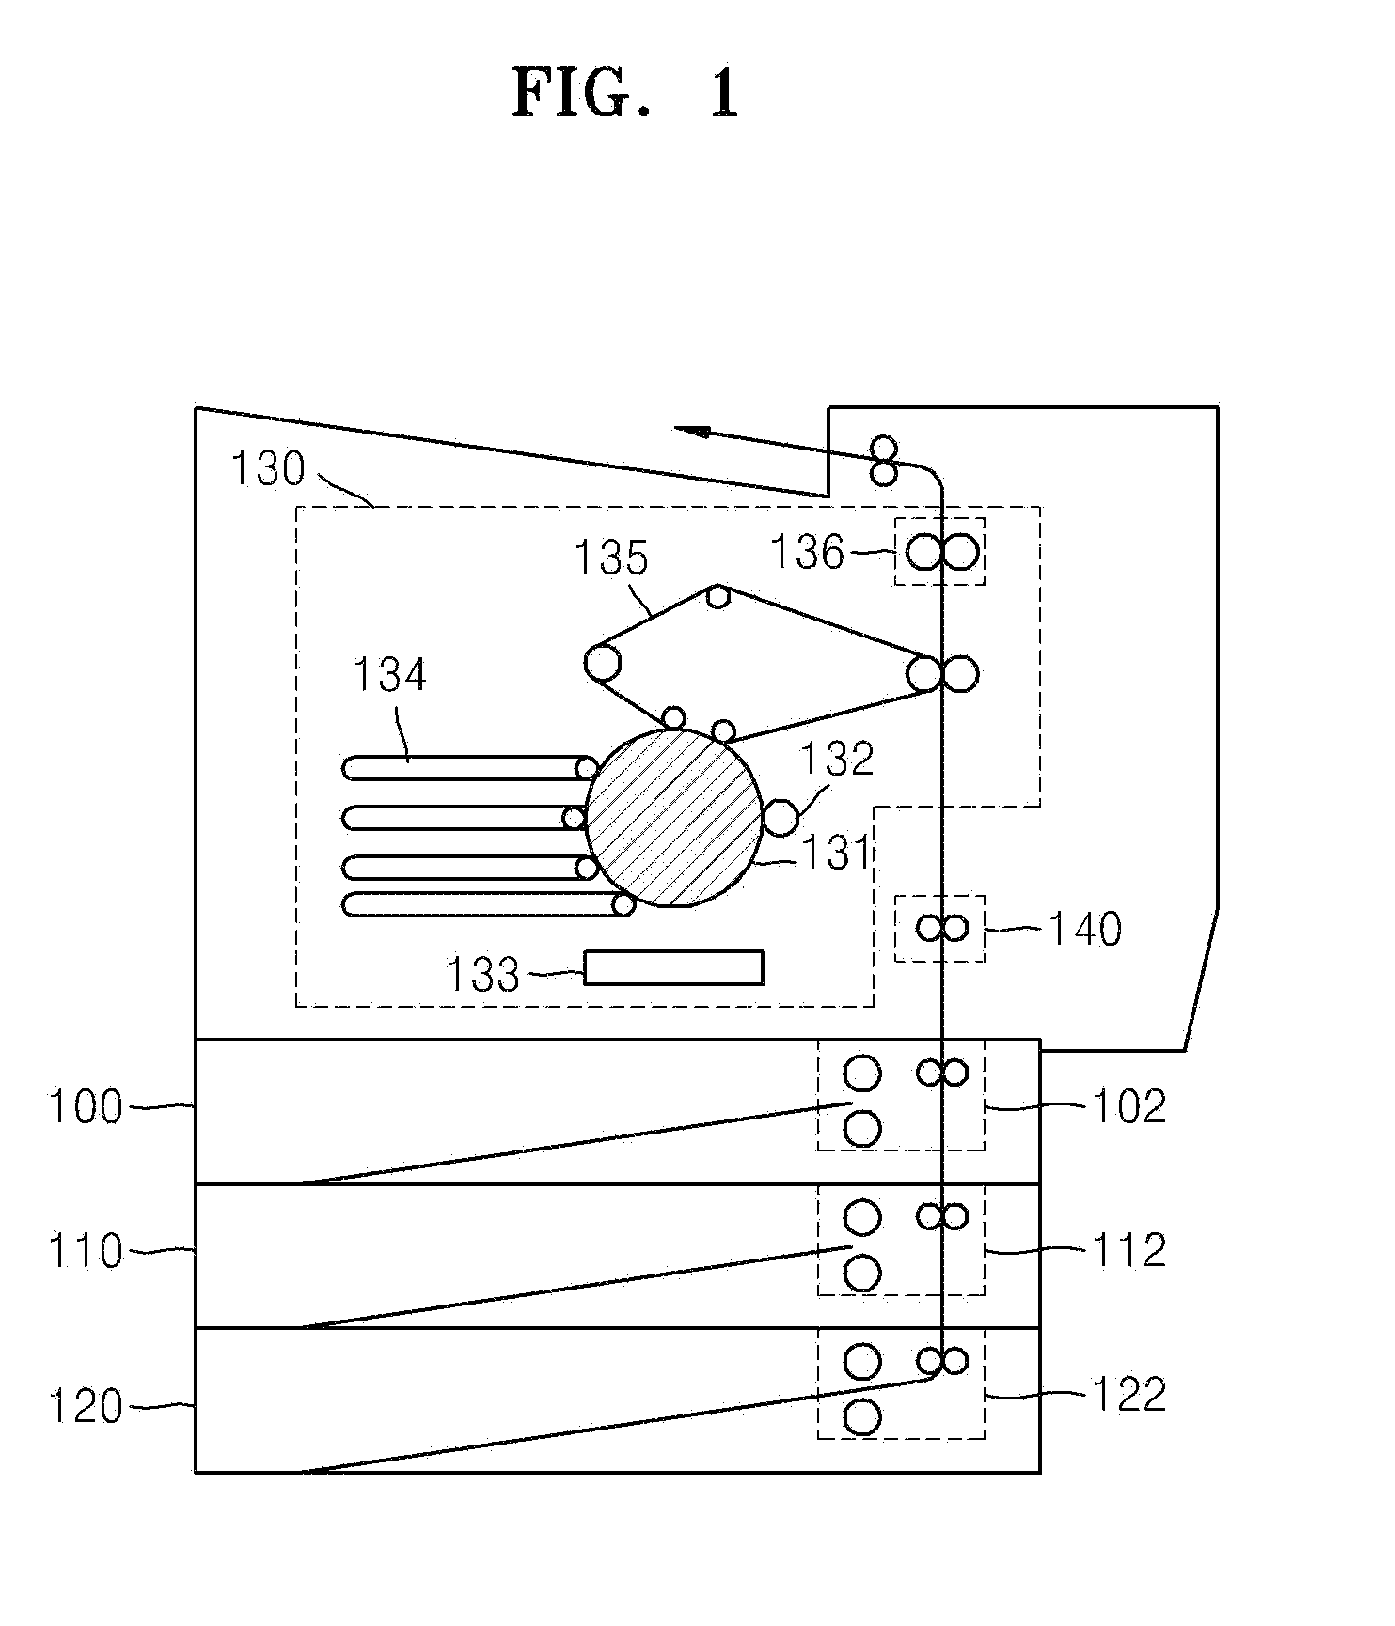 Method and apparatus for controlling transfer of paper